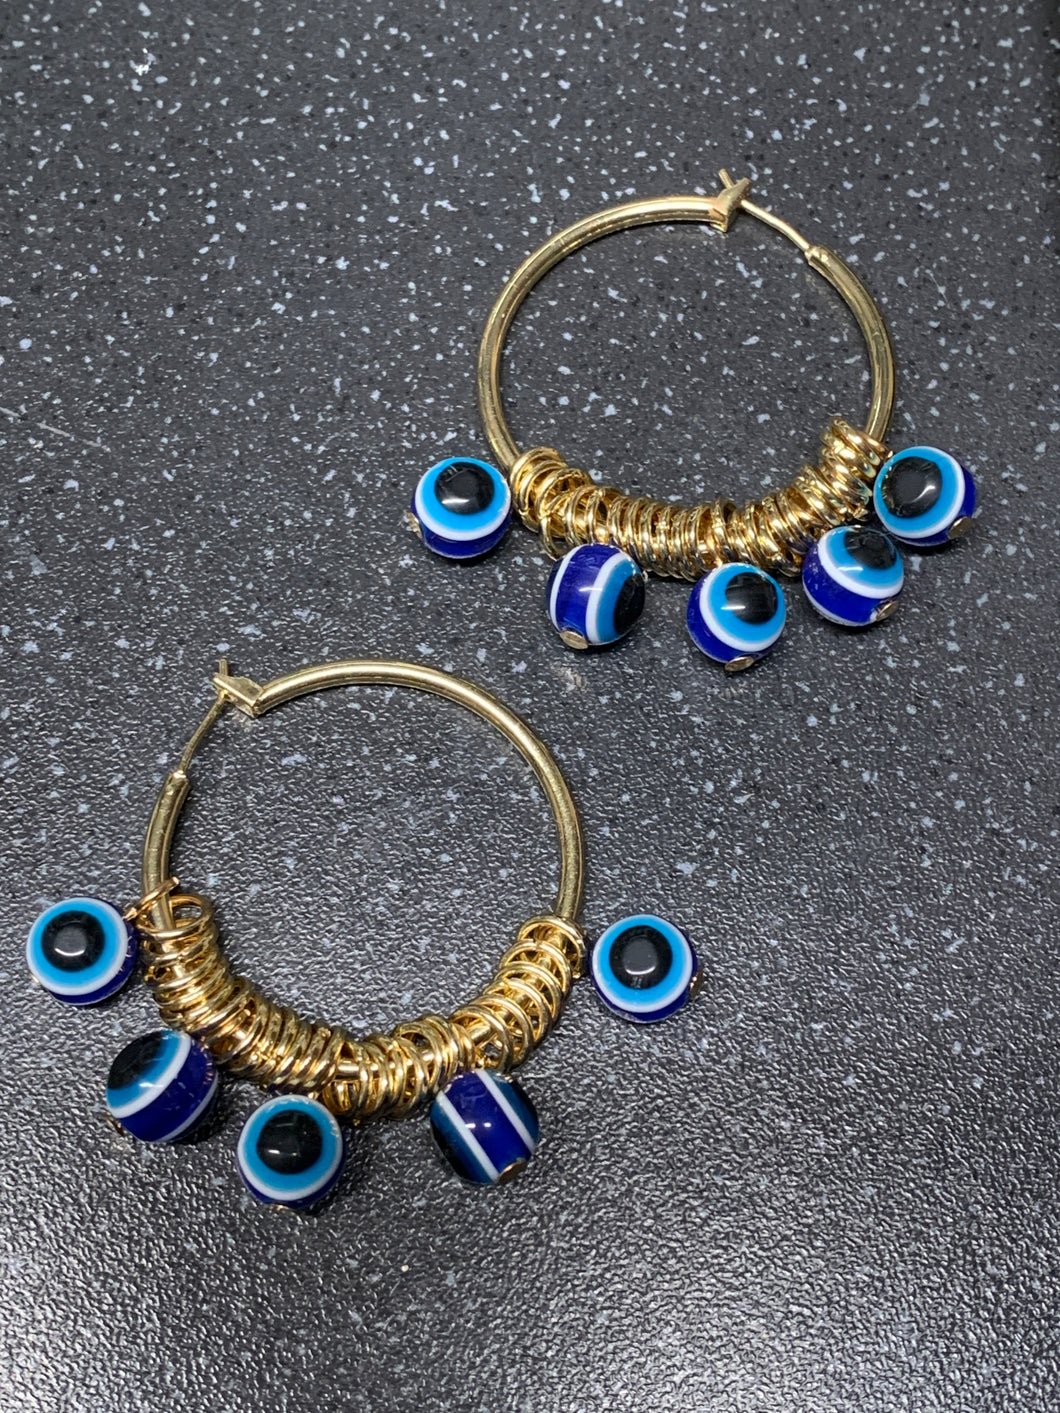 Evil Eye Earrings To Protect From Negative Energies, Attacks, Jealousy & More (Blue and gold)